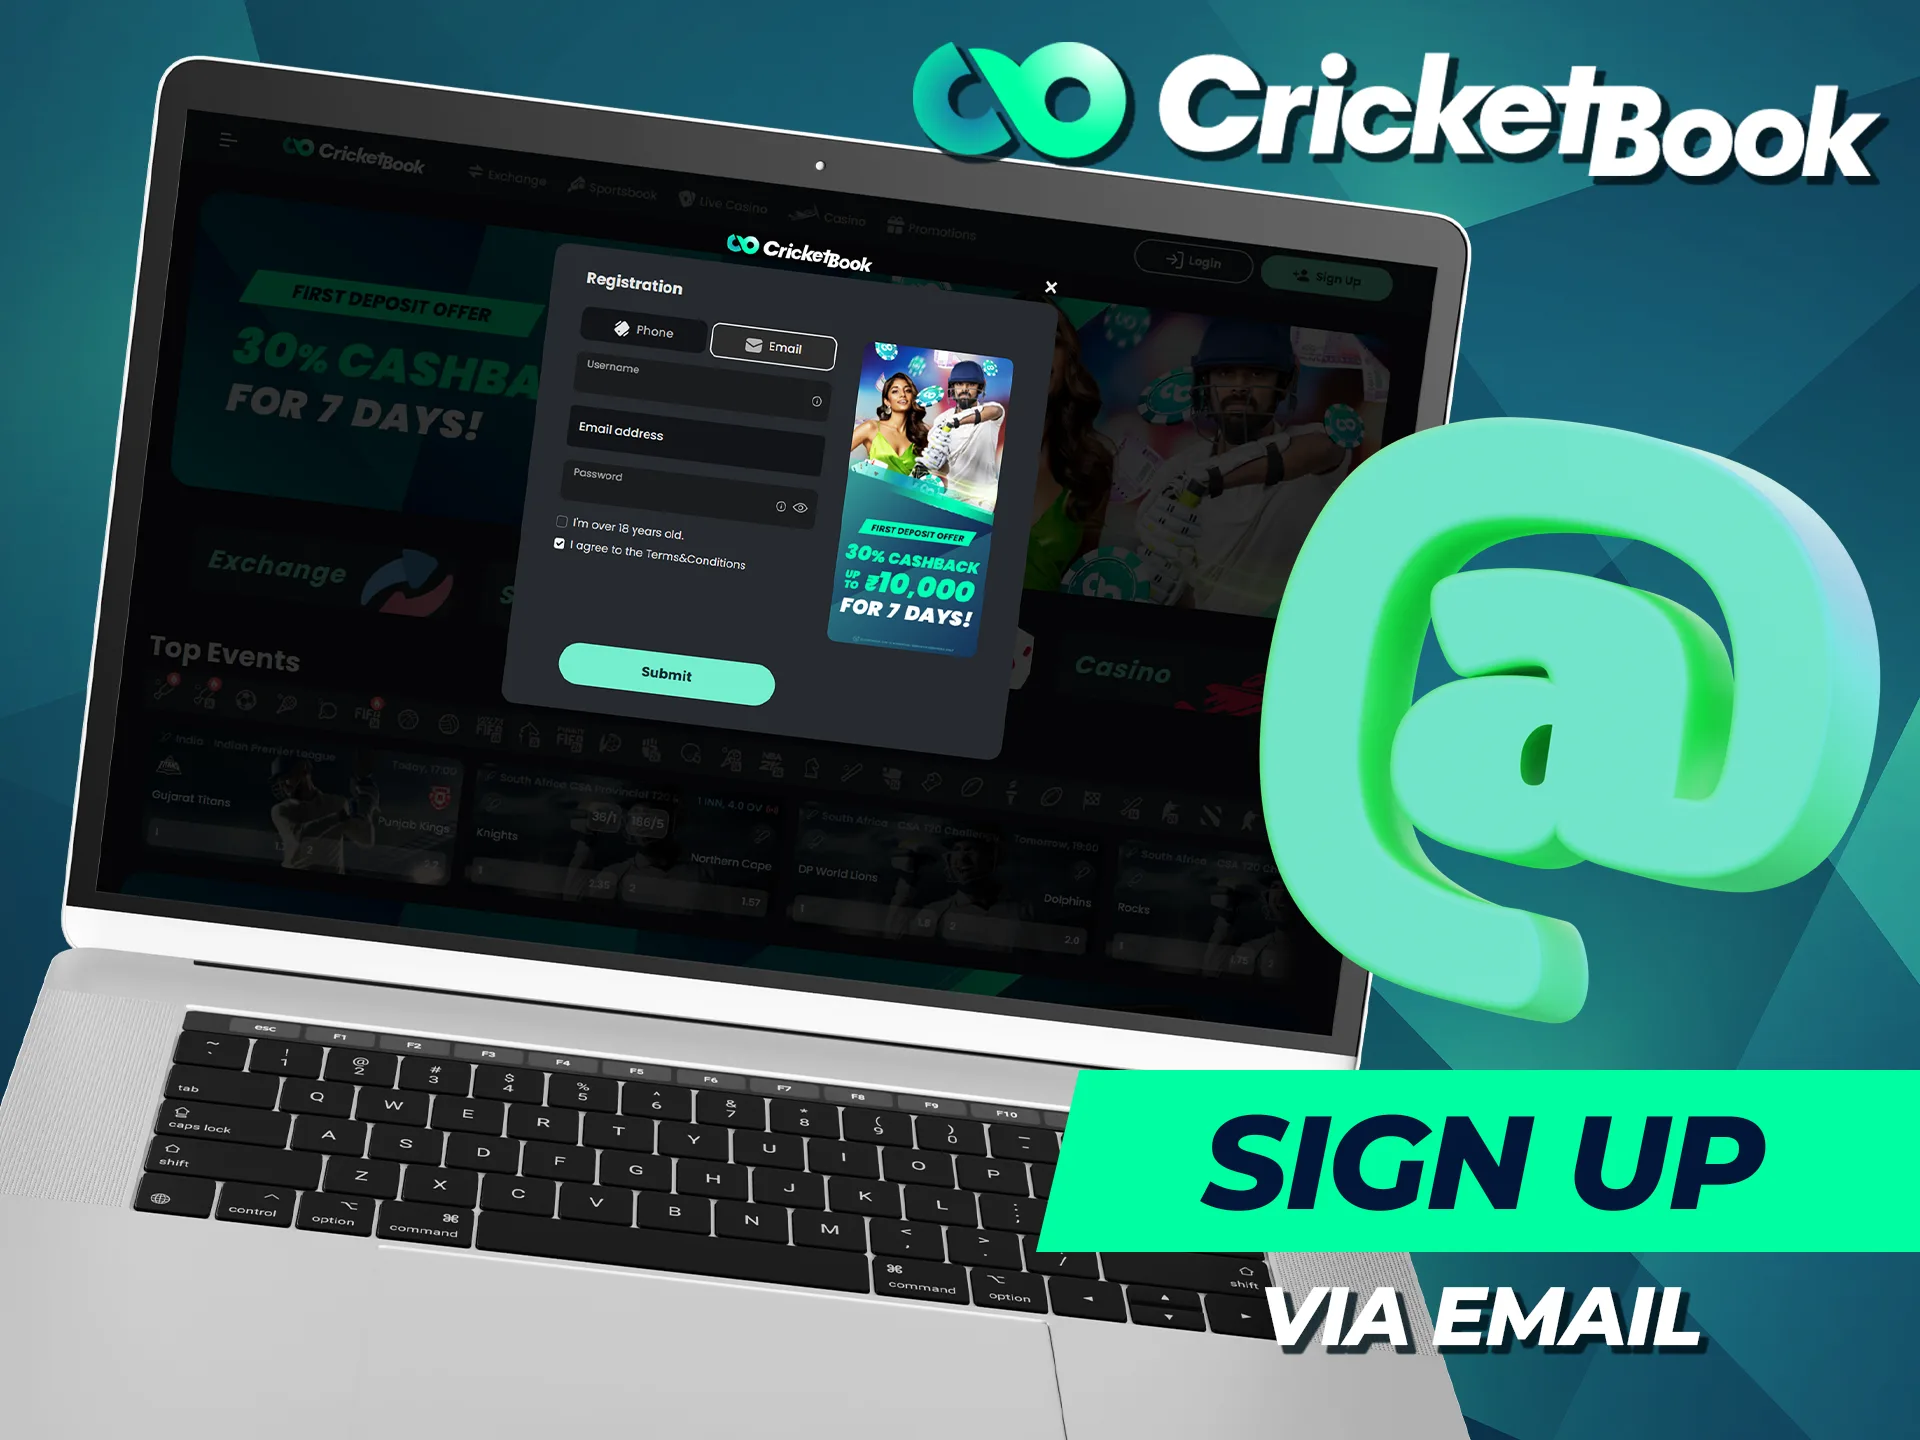 CricketBook offers account registration via email.